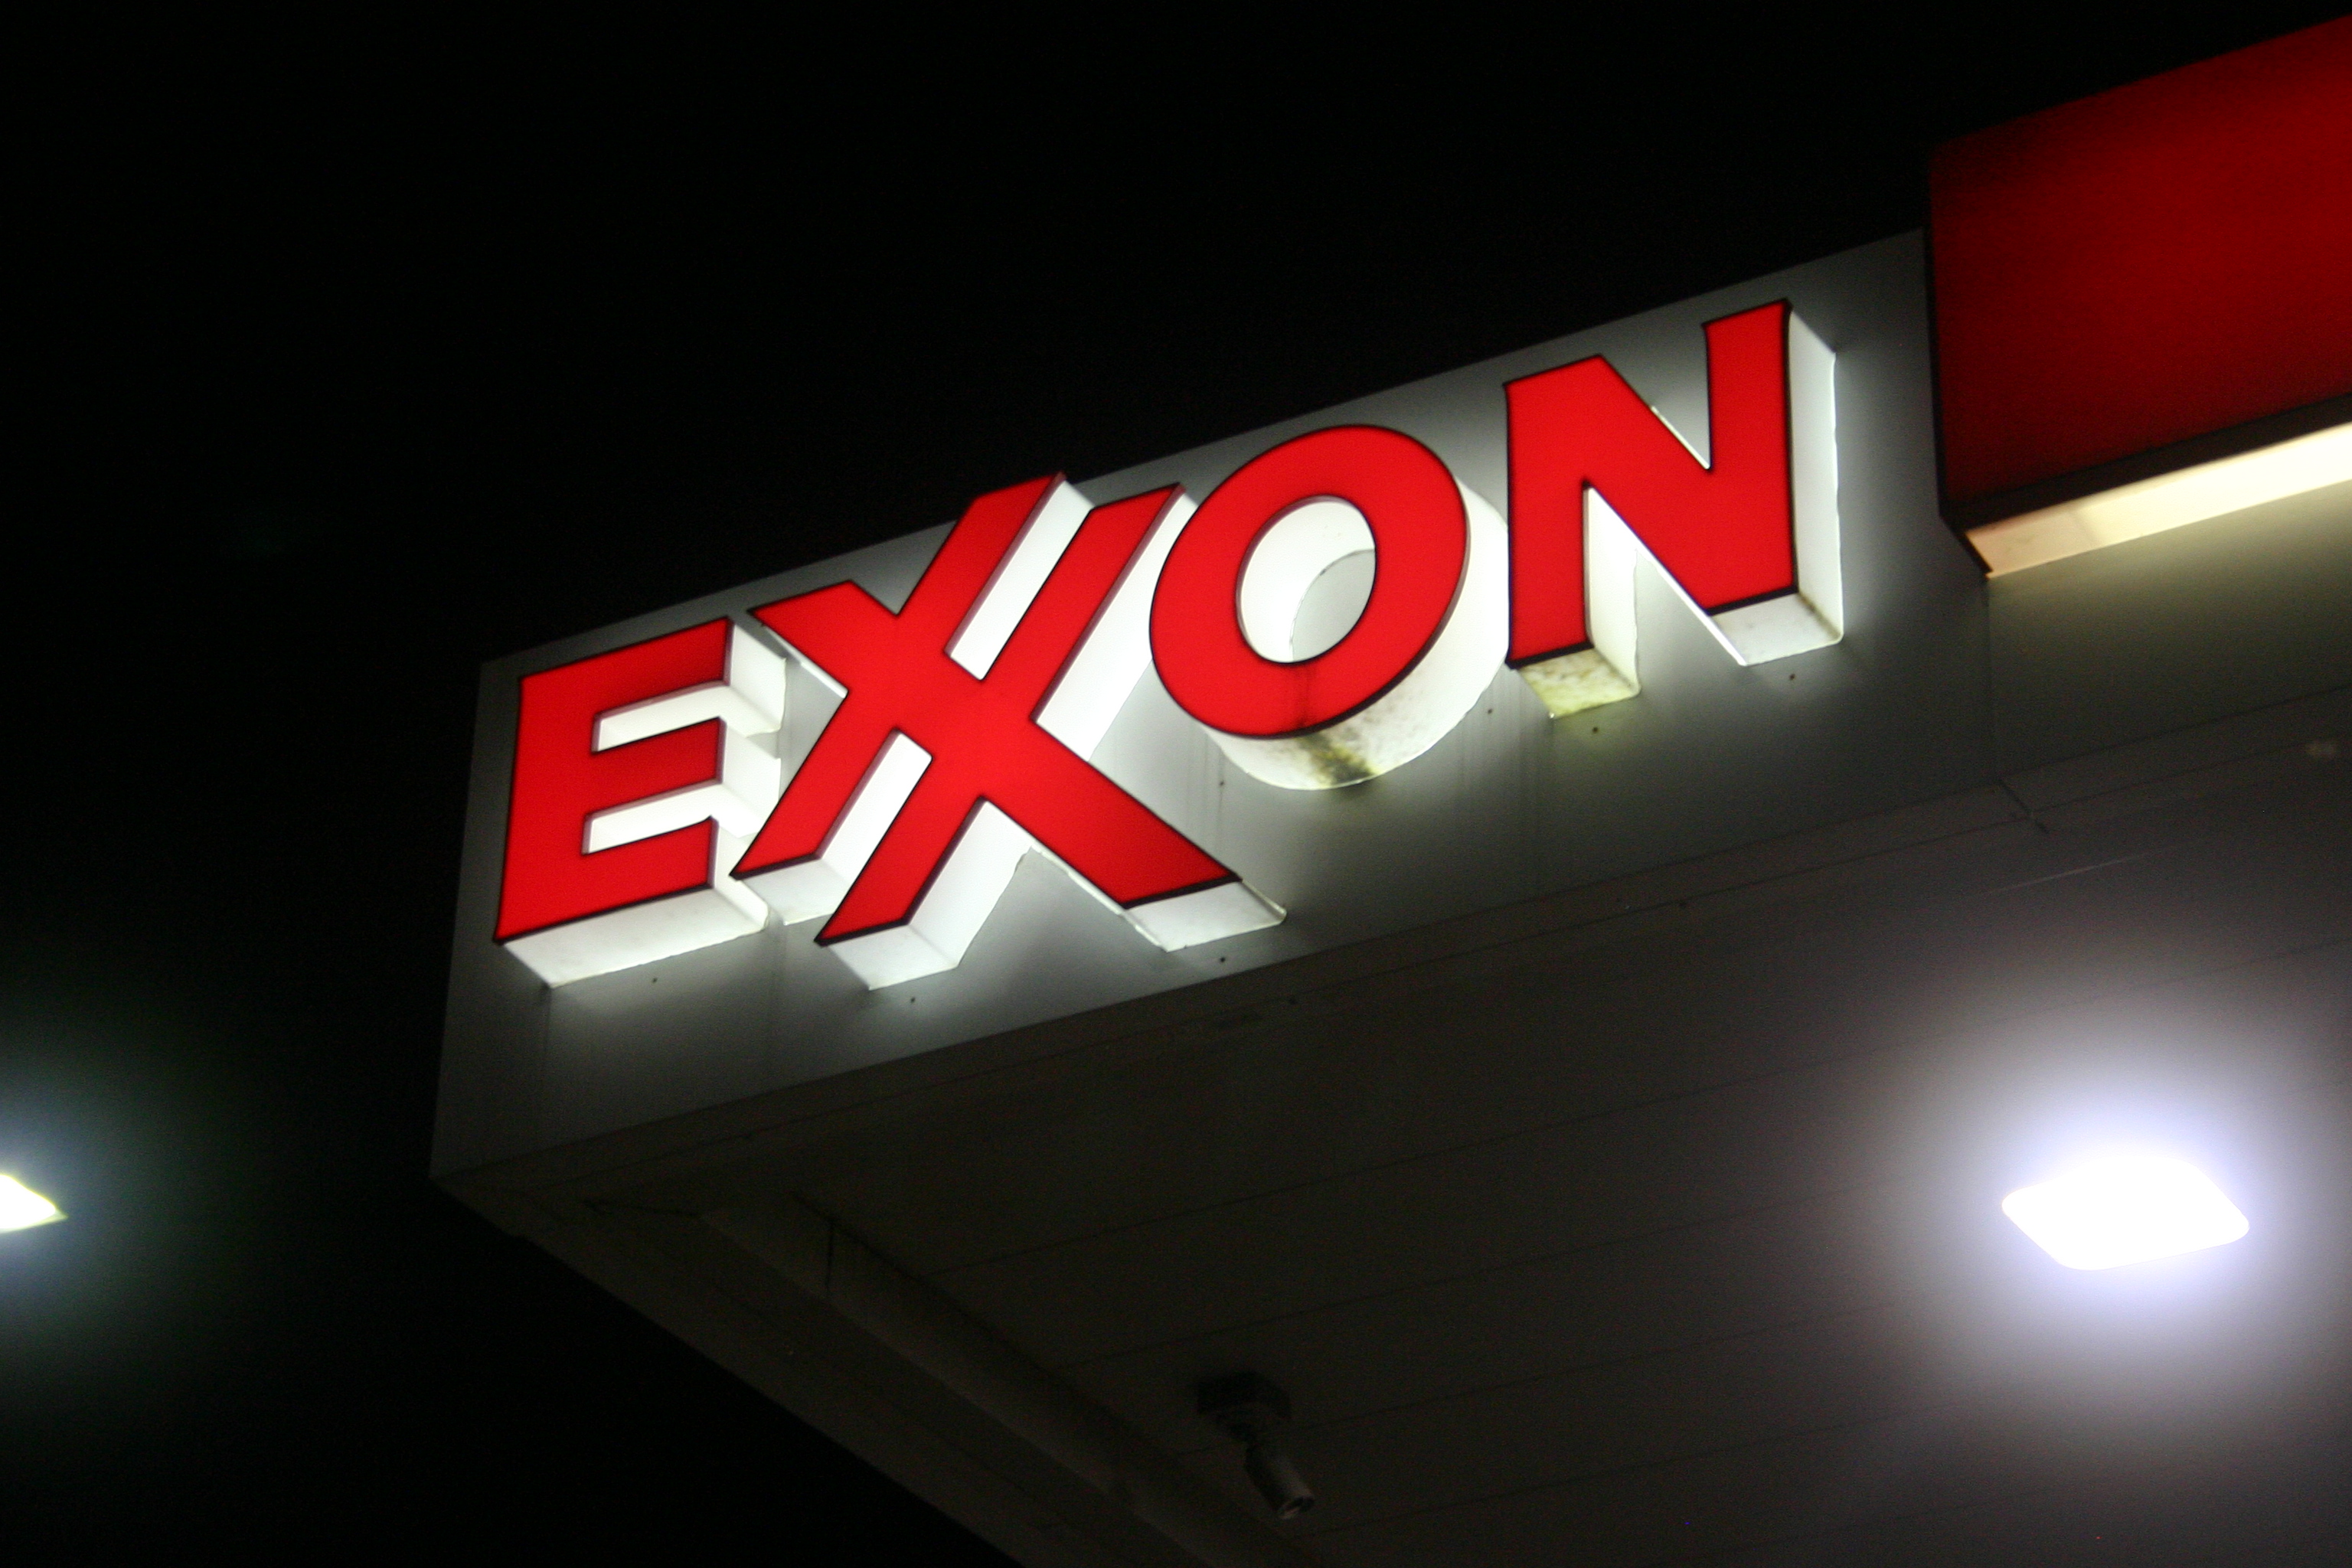  Exxon shareholders reject climate proposals from activist in annual meeting